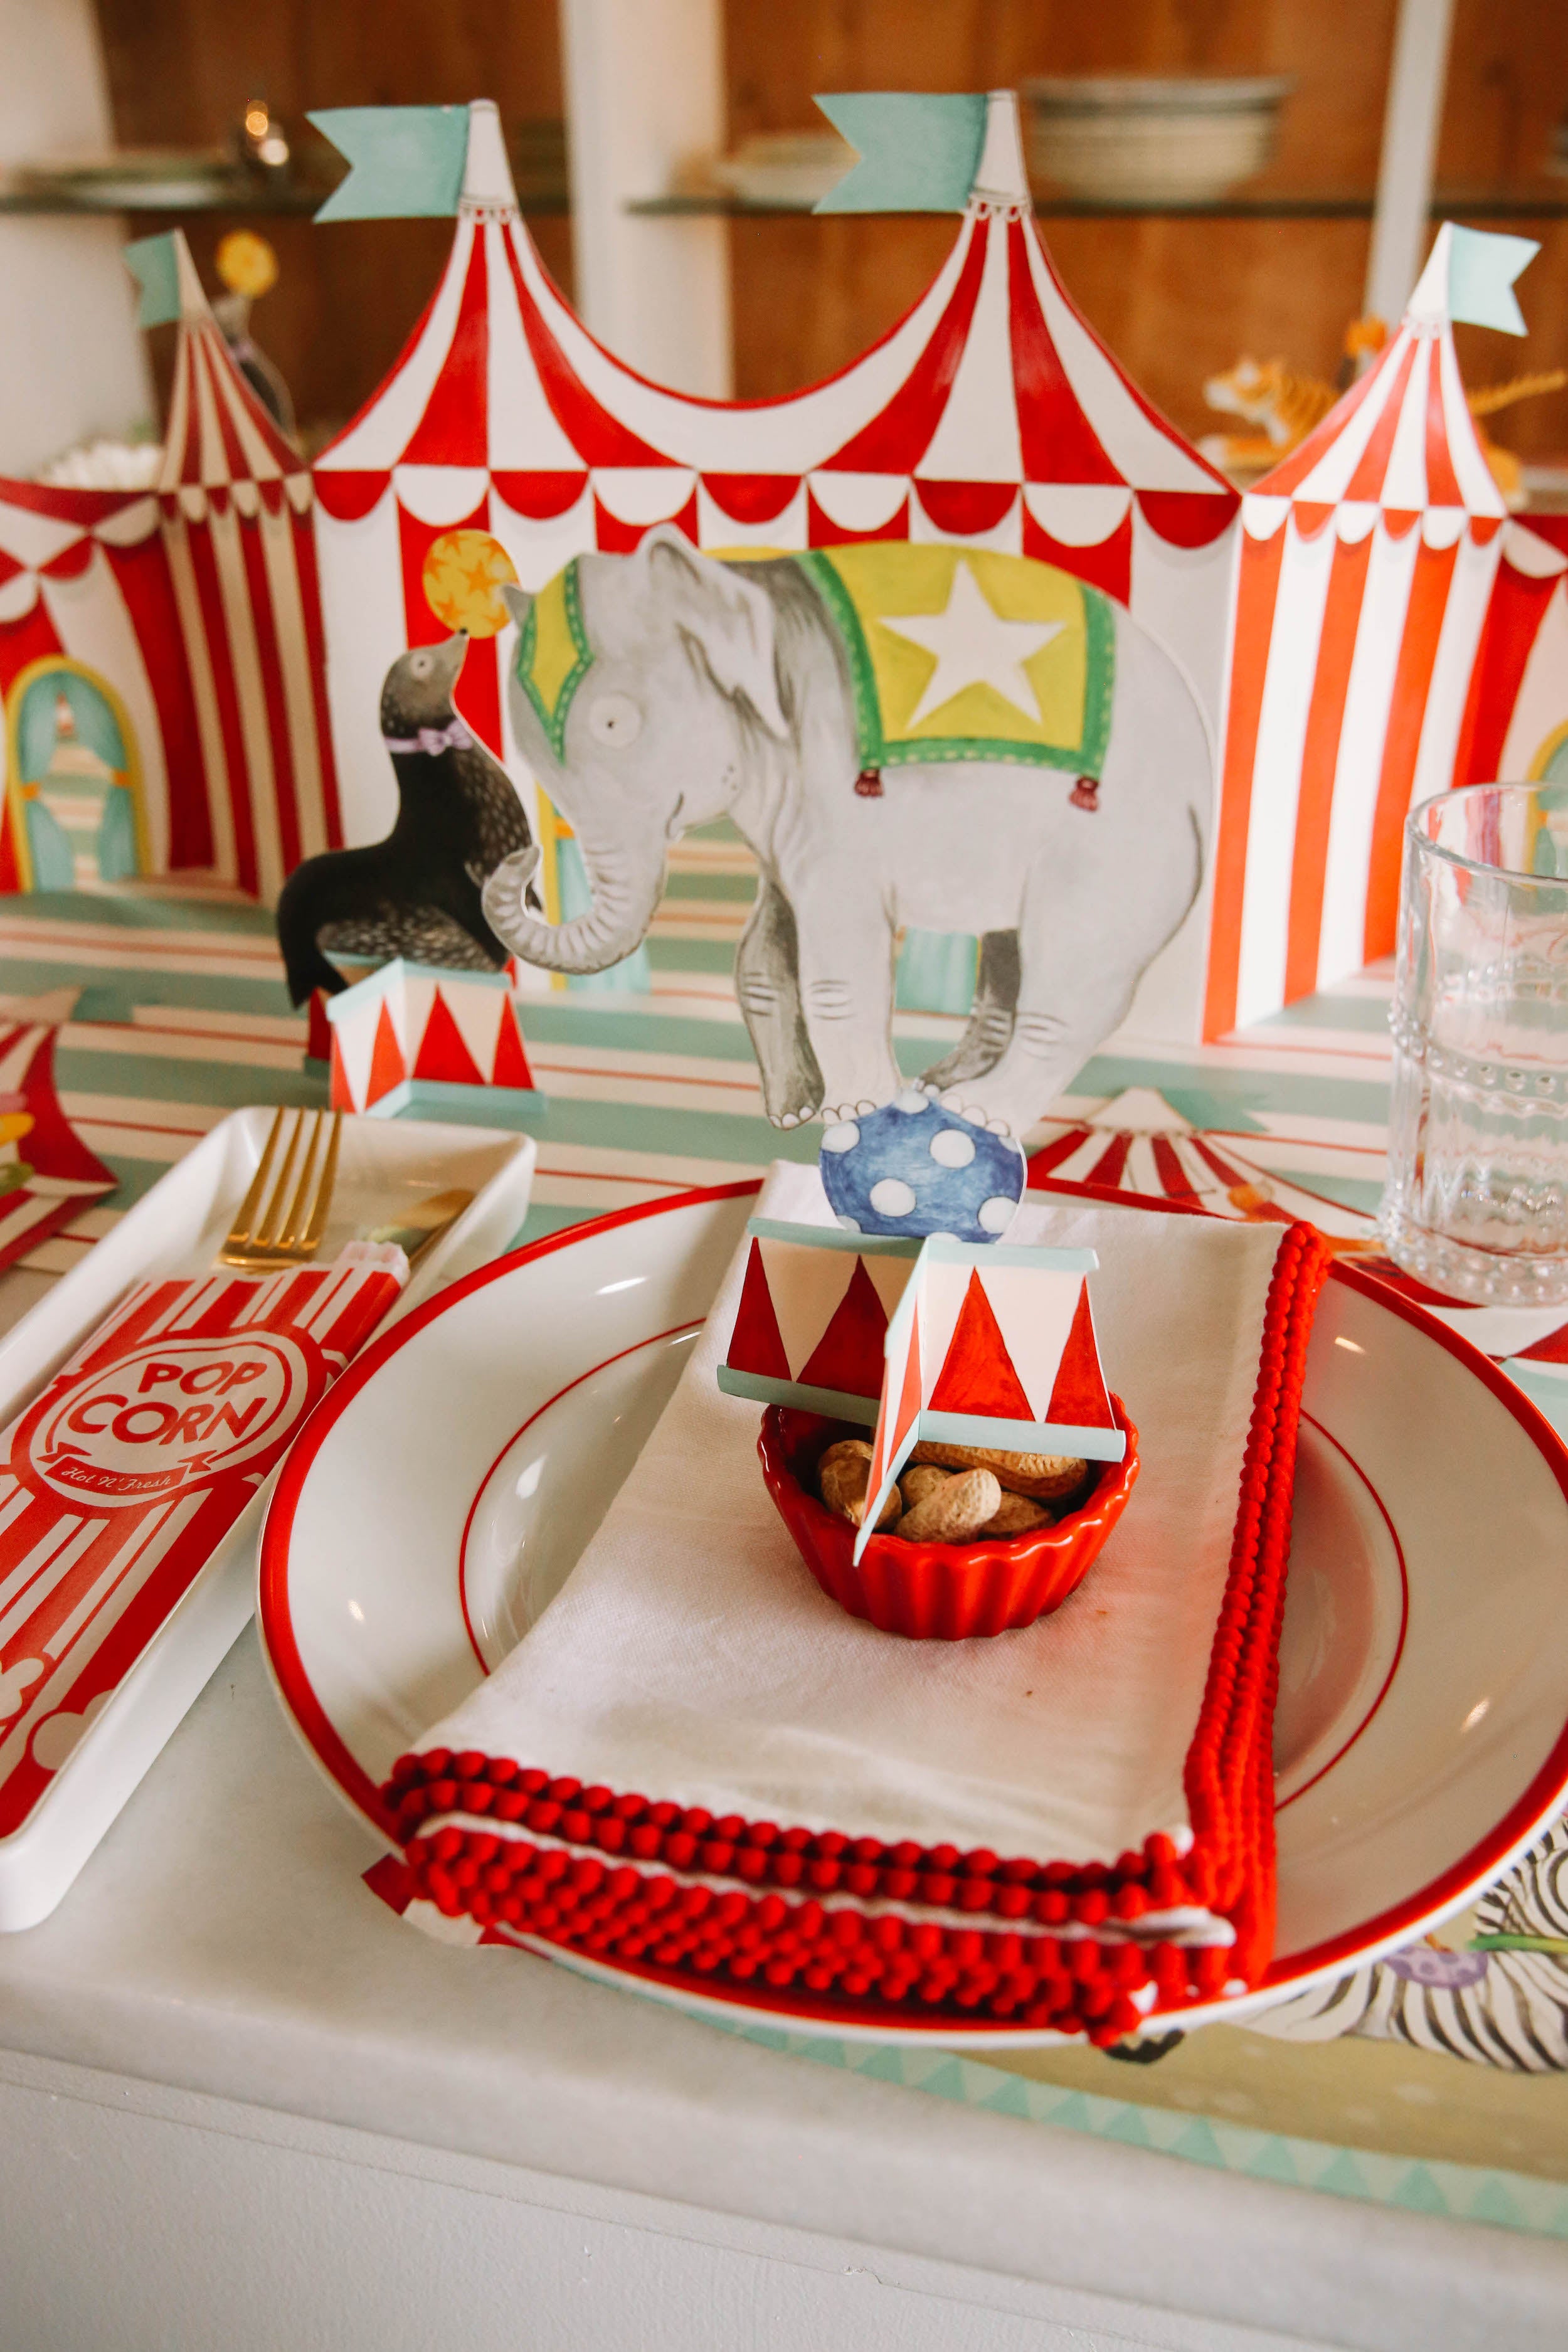 The Elephant Circus Trio Table Ornament sitting atop the plate in a circus-themed place setting.